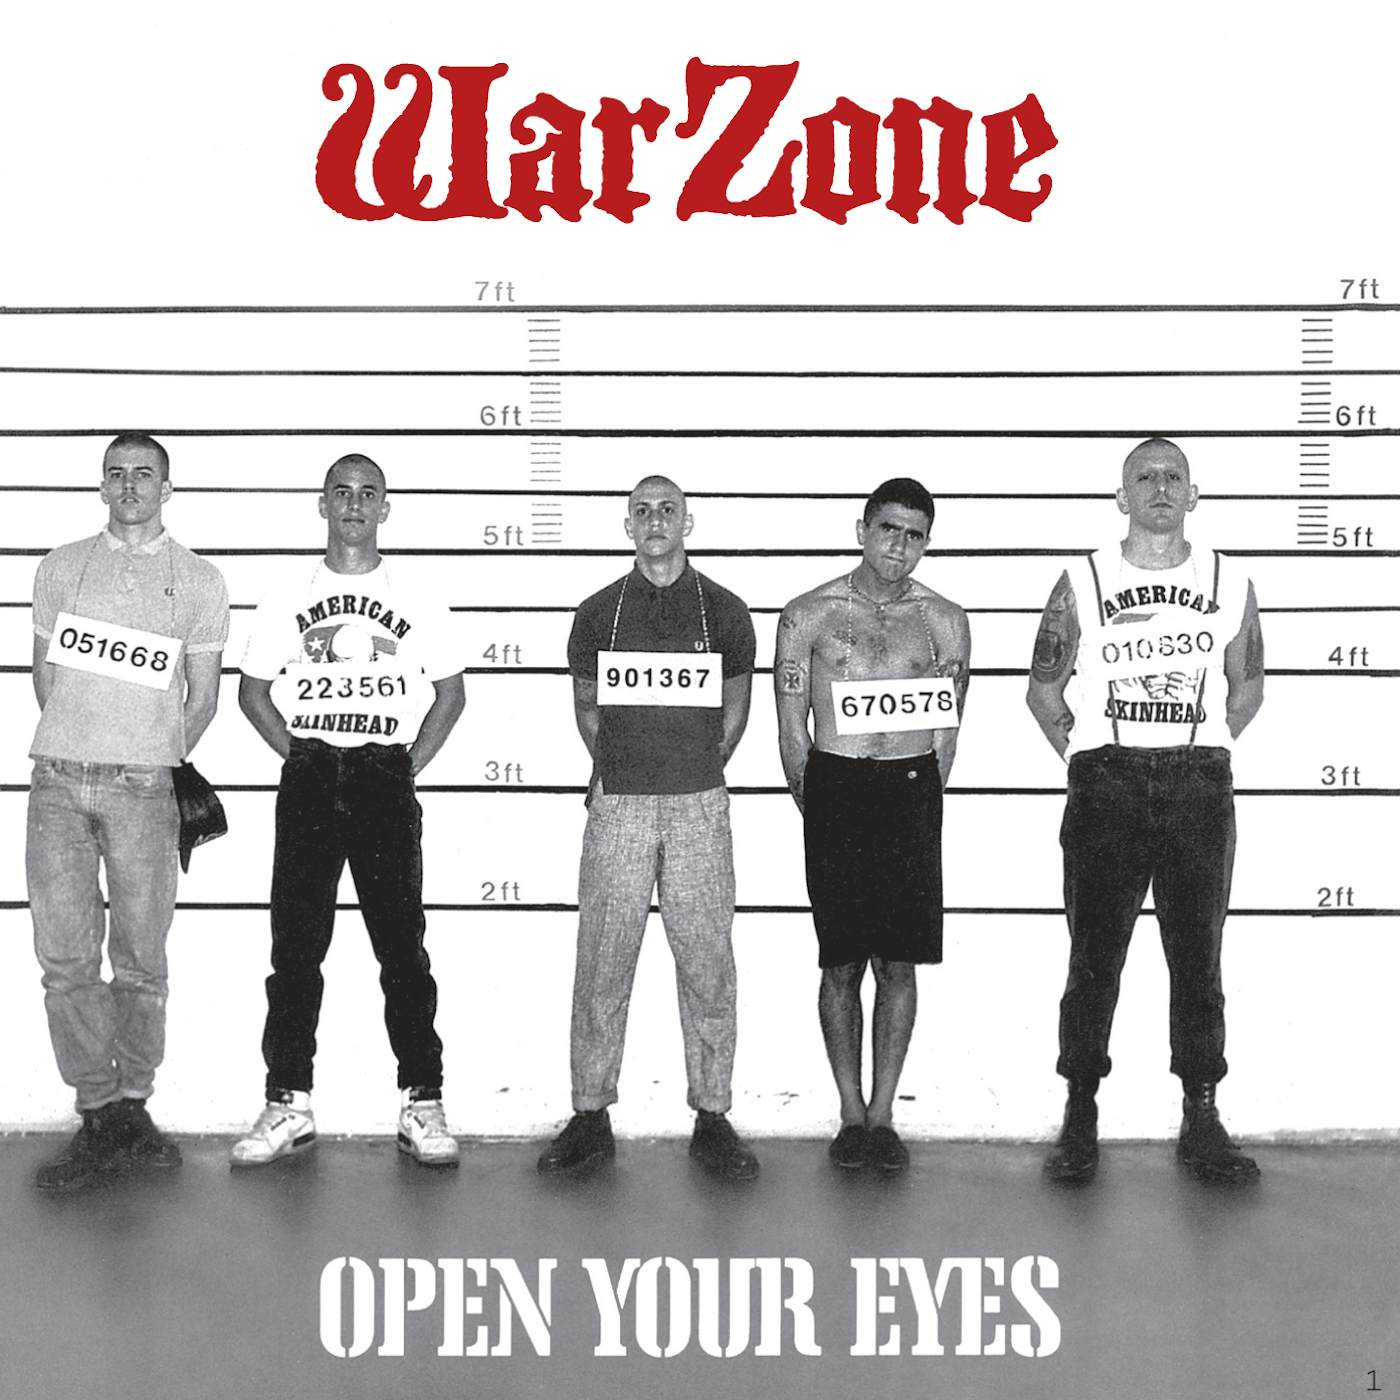 Warzone OPEN YOUR EYES CD